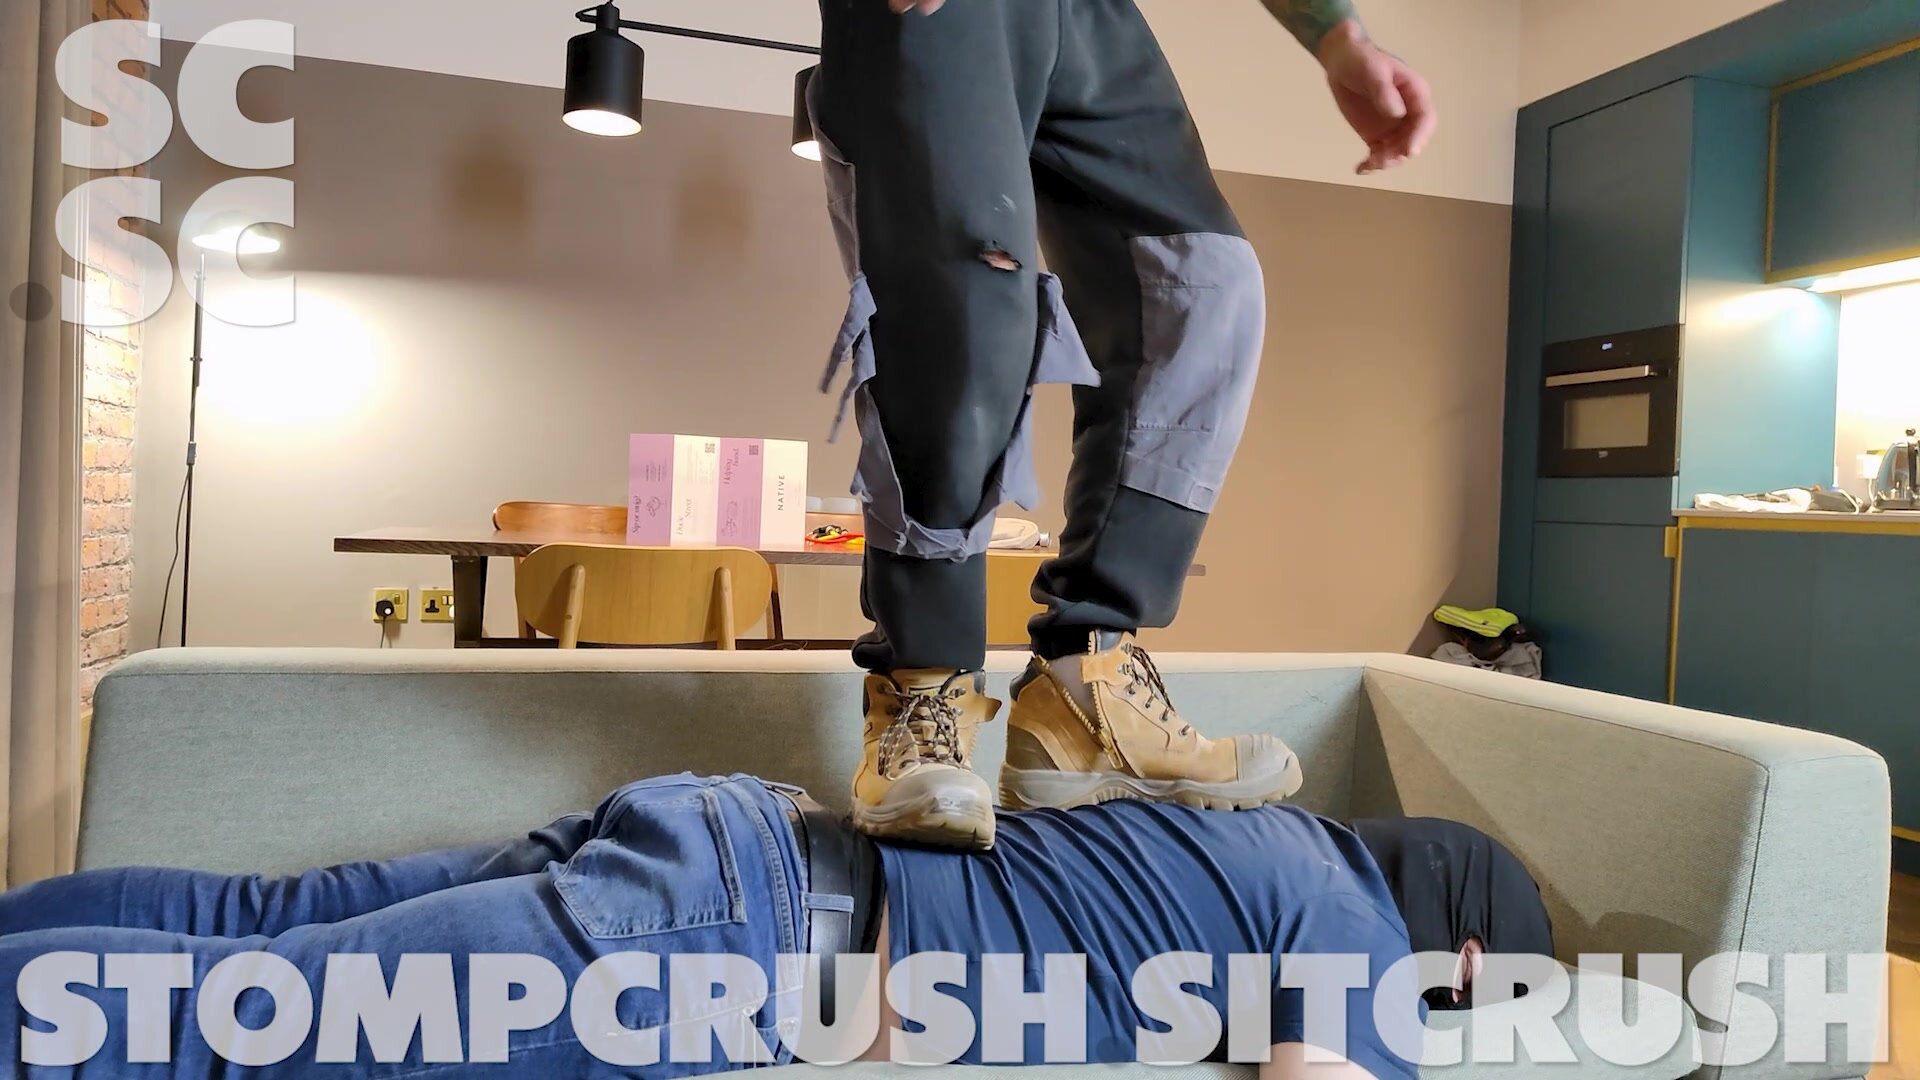 New Vid. str8 workman comes over and tramples slave